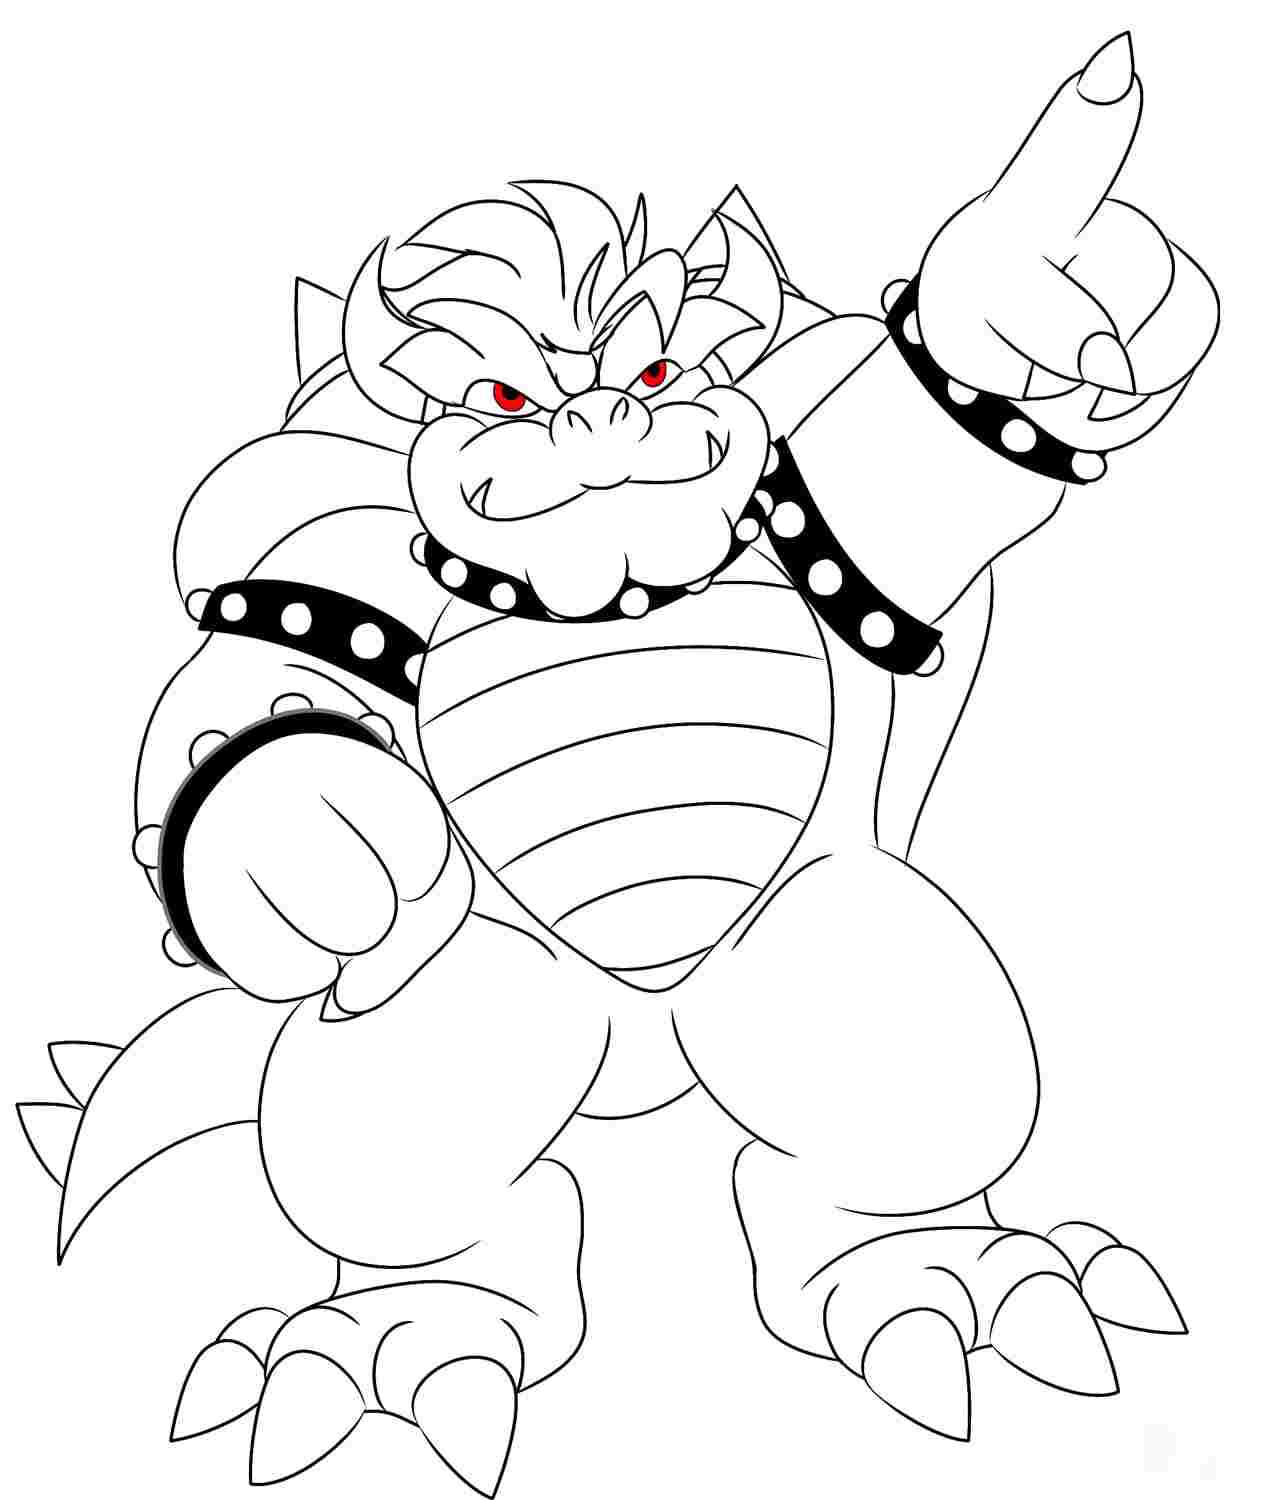 Bowser is pointing something Coloring Page